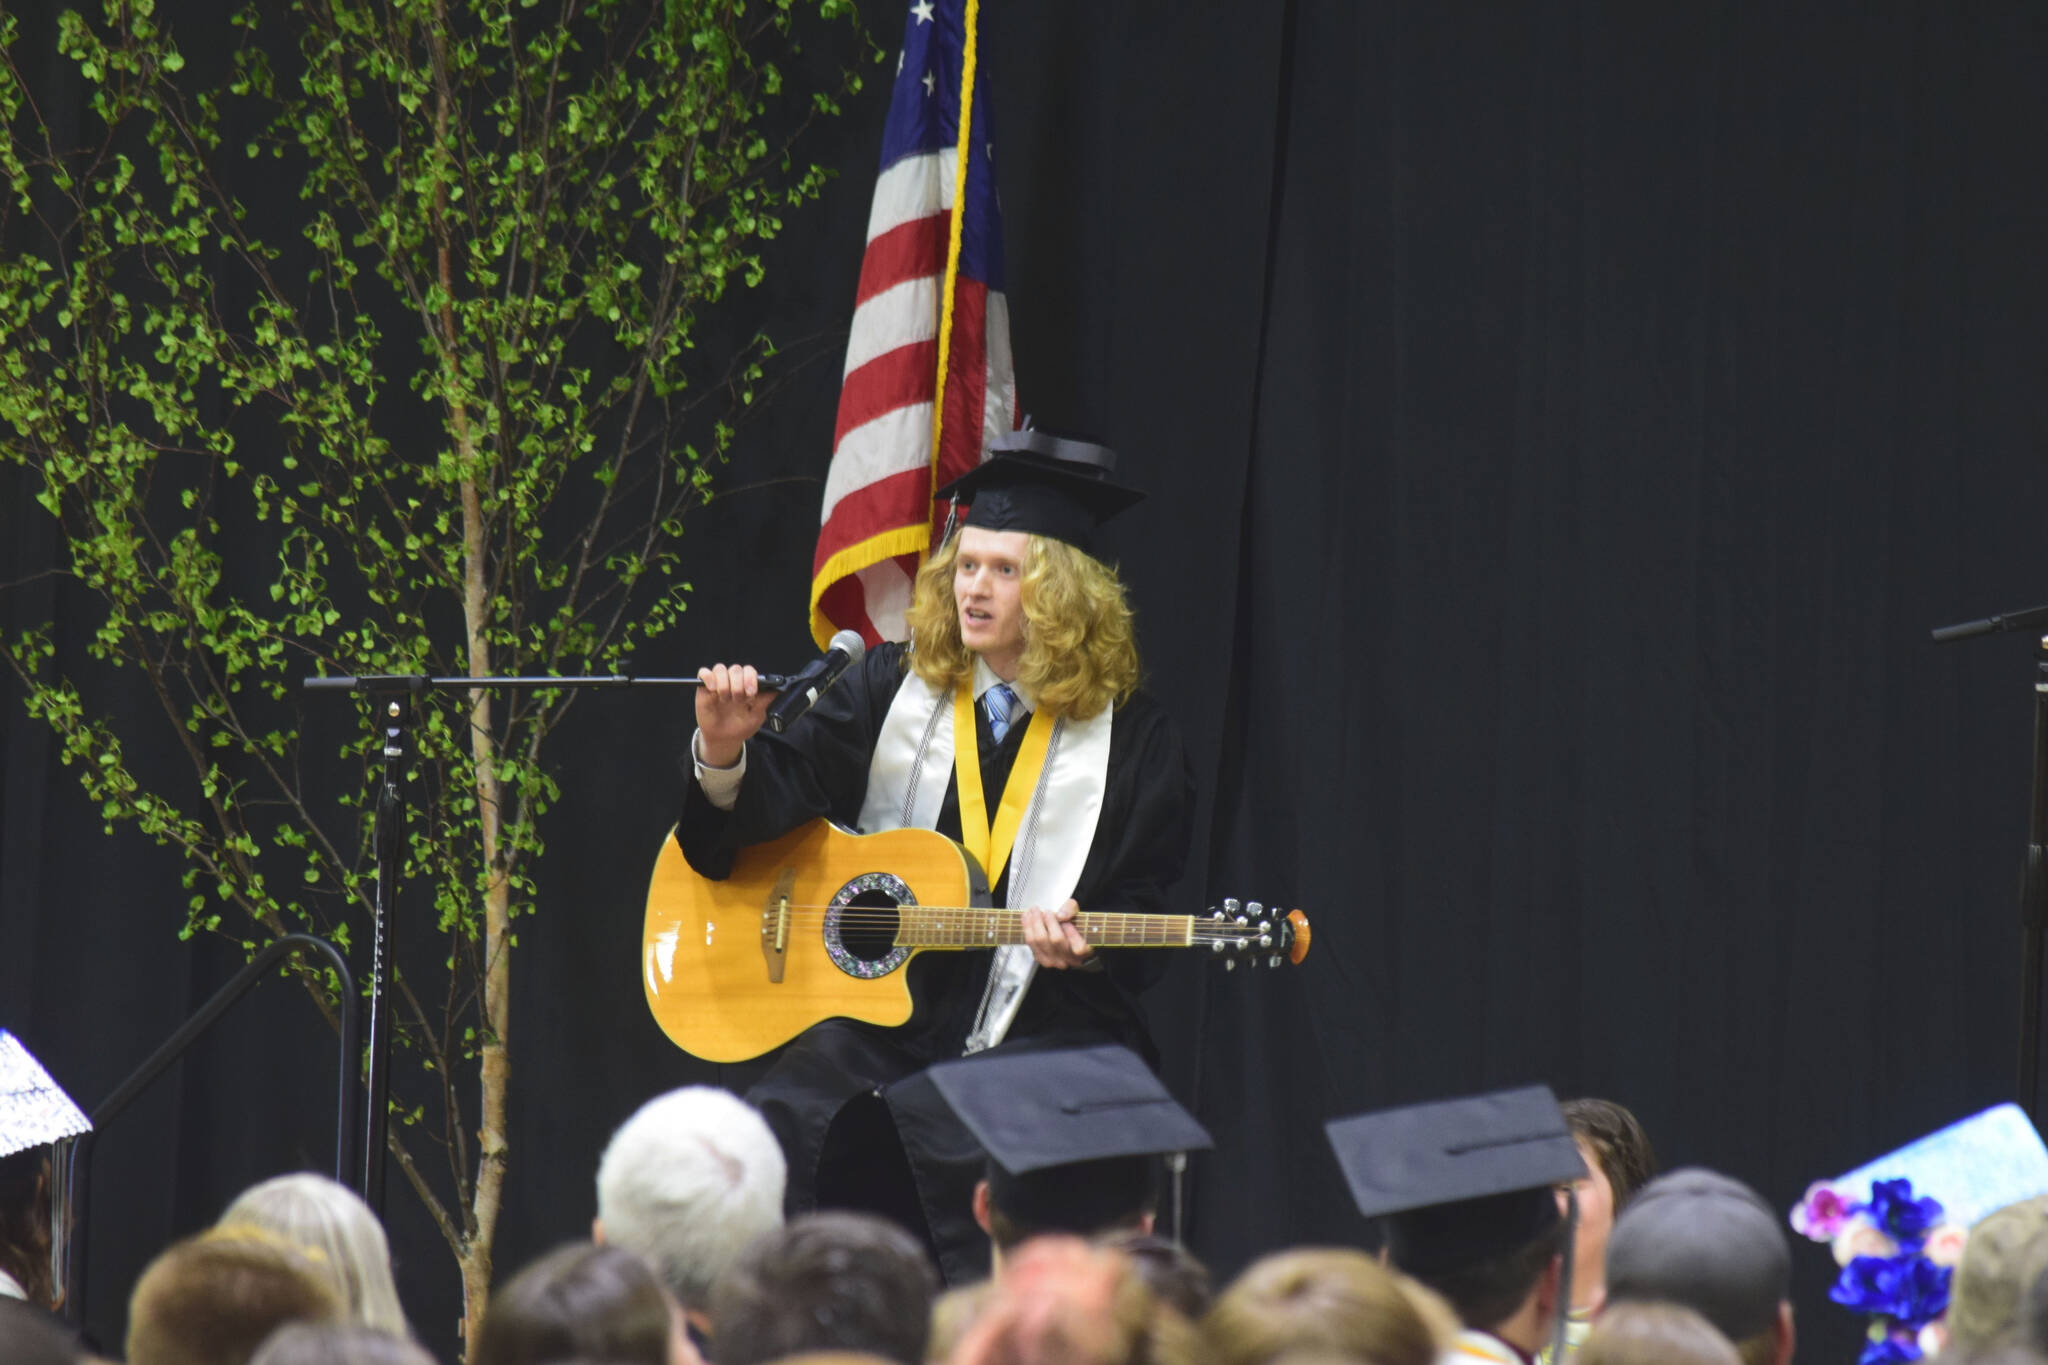 Nikiski Middle/High School Valedictorian Levi Anderson performs John Mayer’s “Stop This Train” during the school’s 2022 commencement ceremony on Monday, May 16, 2022 in Nikiski, Alaska. (Ashlyn O’Hara/Peninsula Clarion)